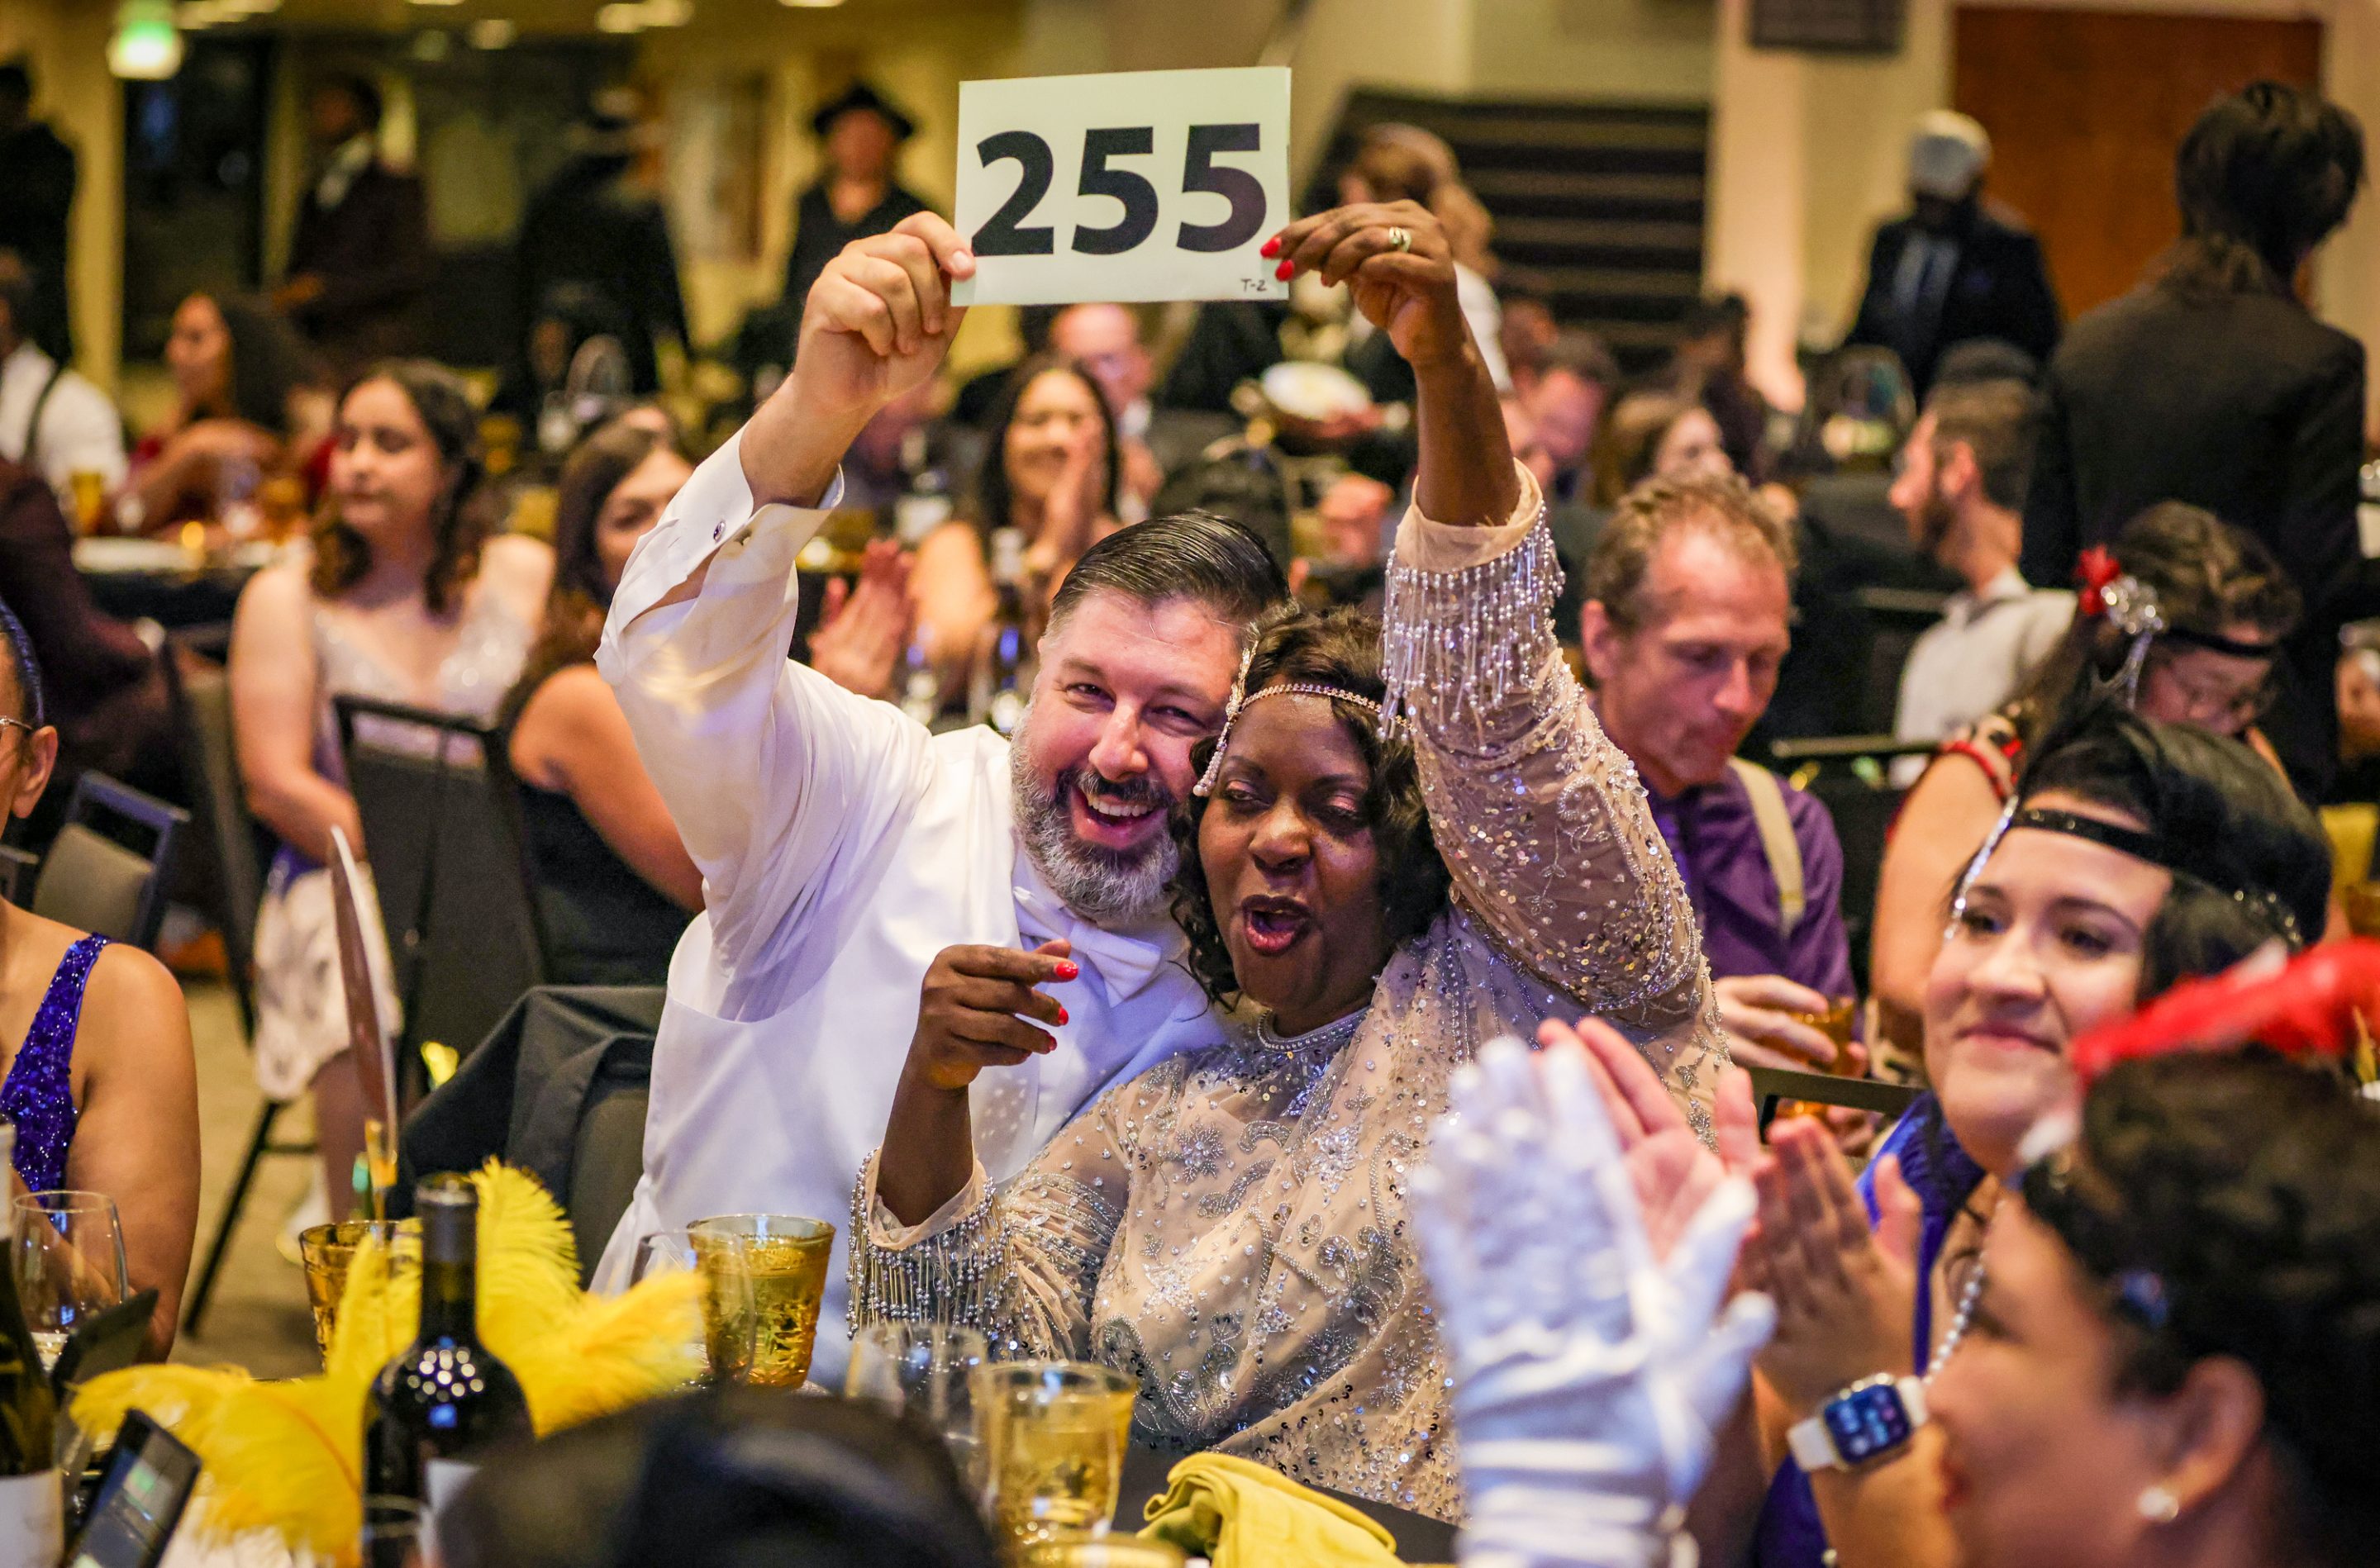 A group of people from The LIME Foundation of Santa Rosa holding up a number at a banquet.